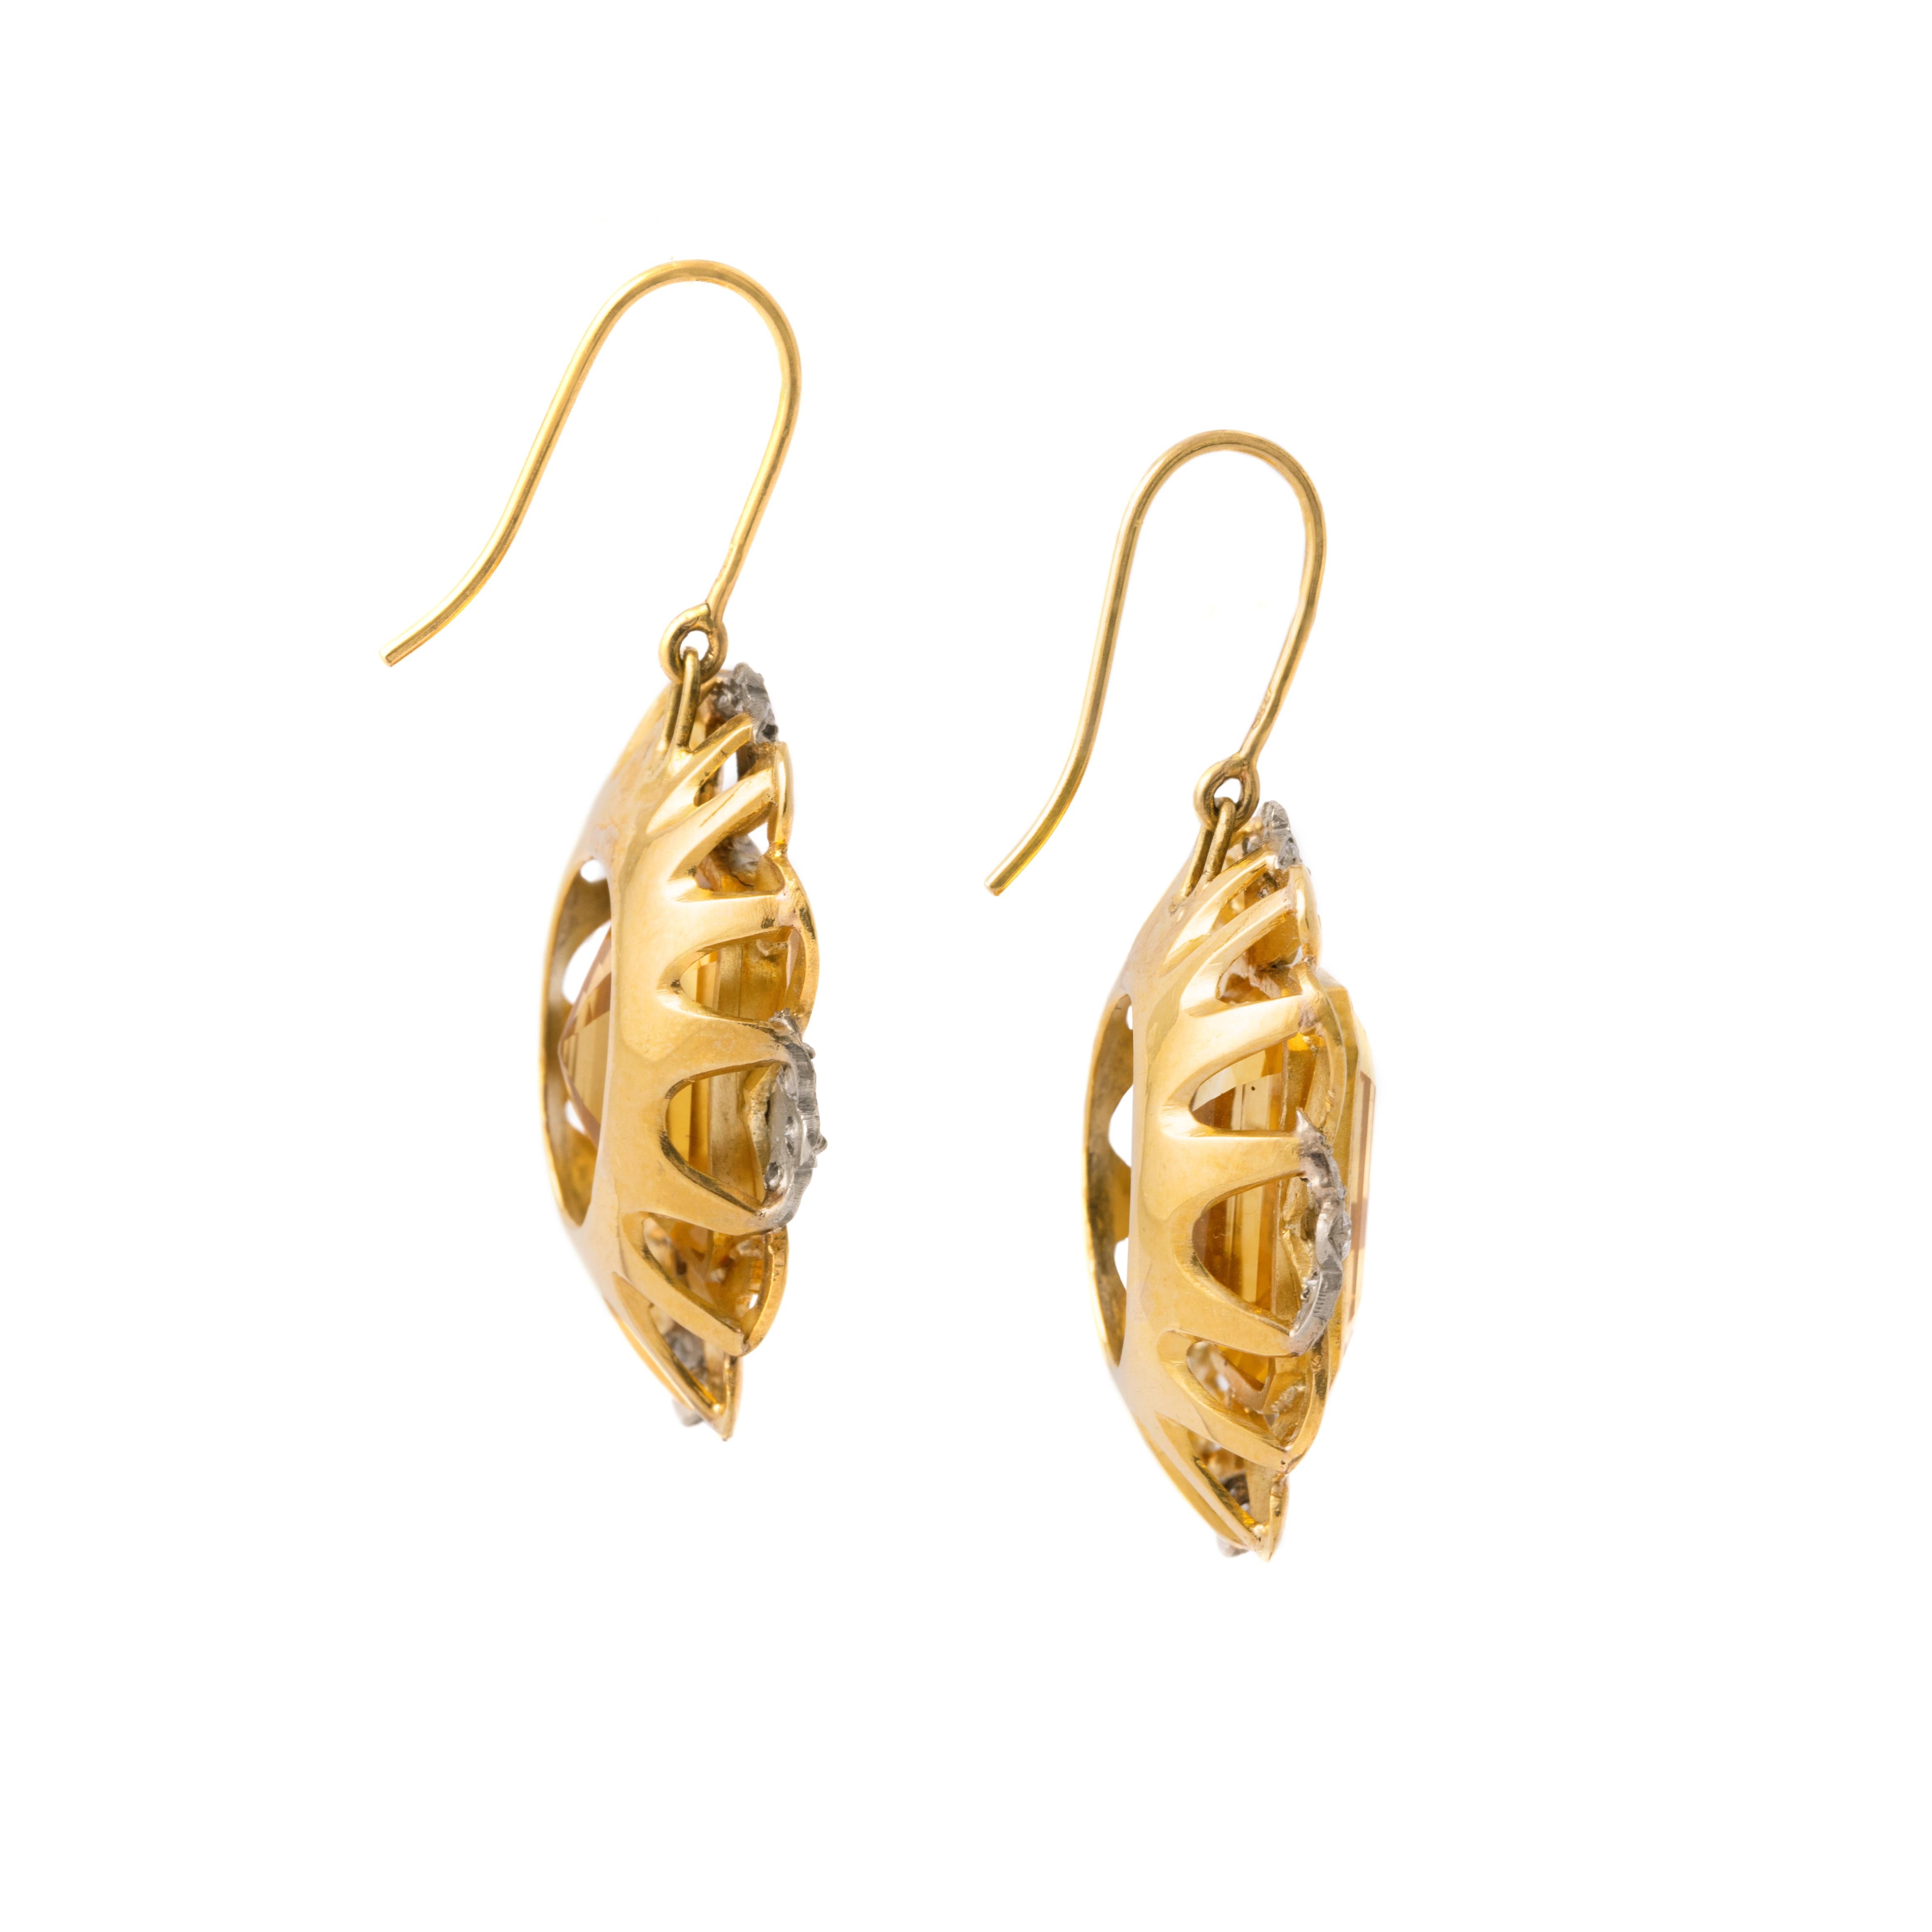 Citrine yellow gold ear pendants. 
Mid 20th century.

Total height: approx. 3.60 centimeters.
Total width: approx. 1.90 centimeters.
Total weight: 13.76 grams.